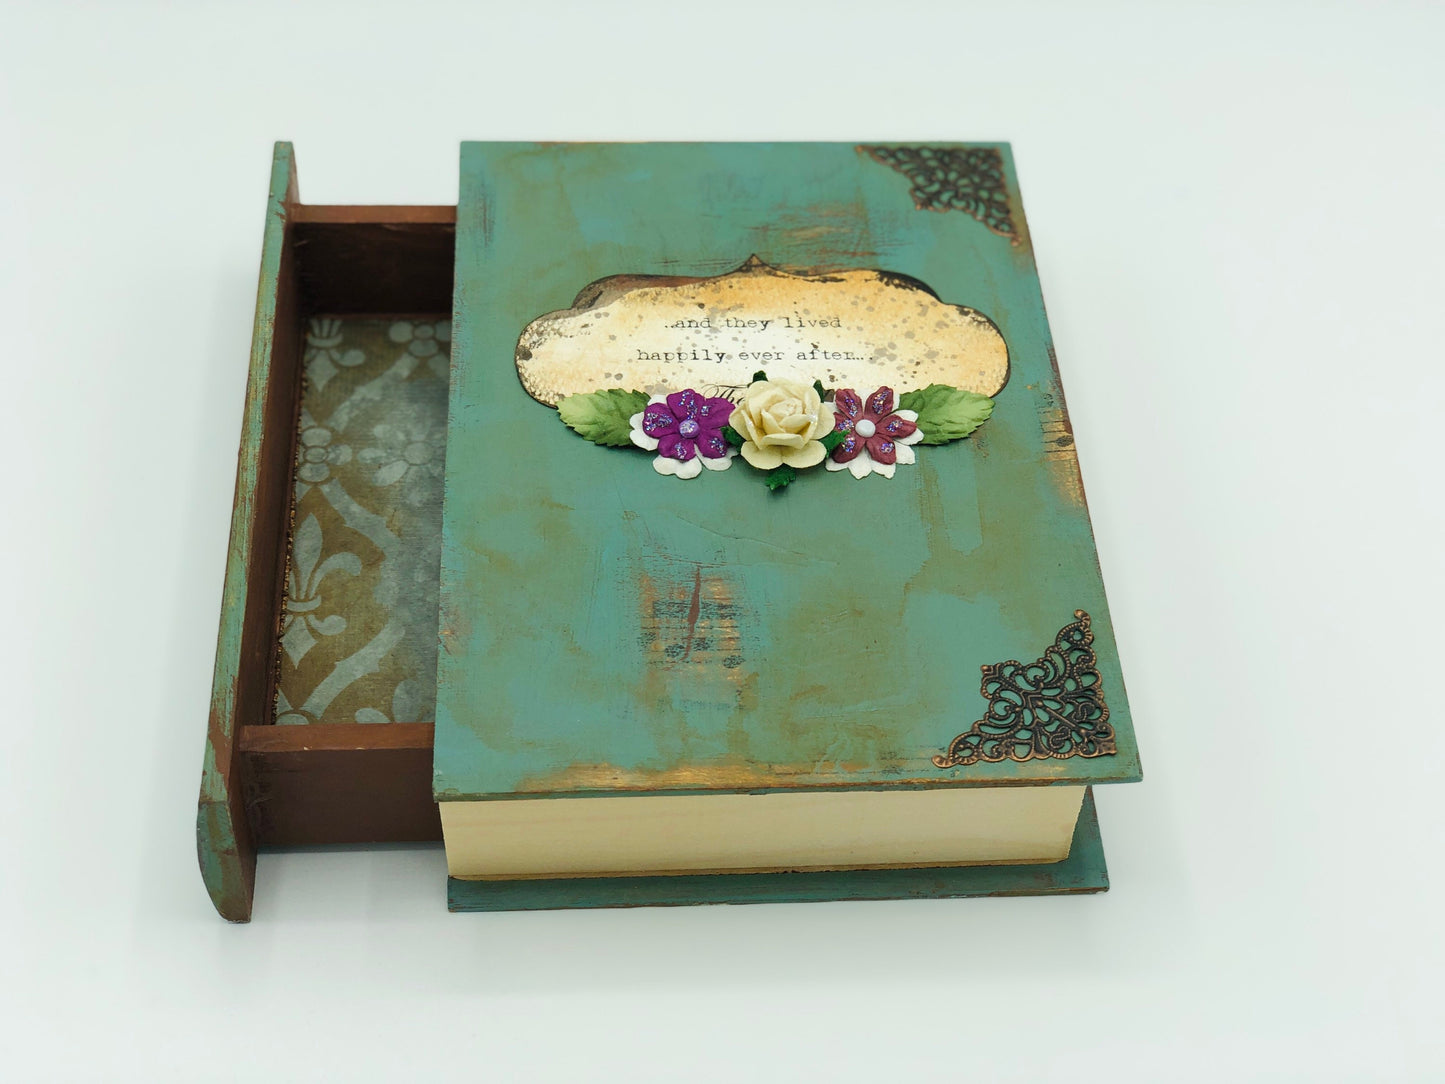 Jewellery Box Vintage Book with Secret Spine Drawer, Photo box Happily Ever After, Vintage Wedding Card box, Gift for her, Keepsake Chest